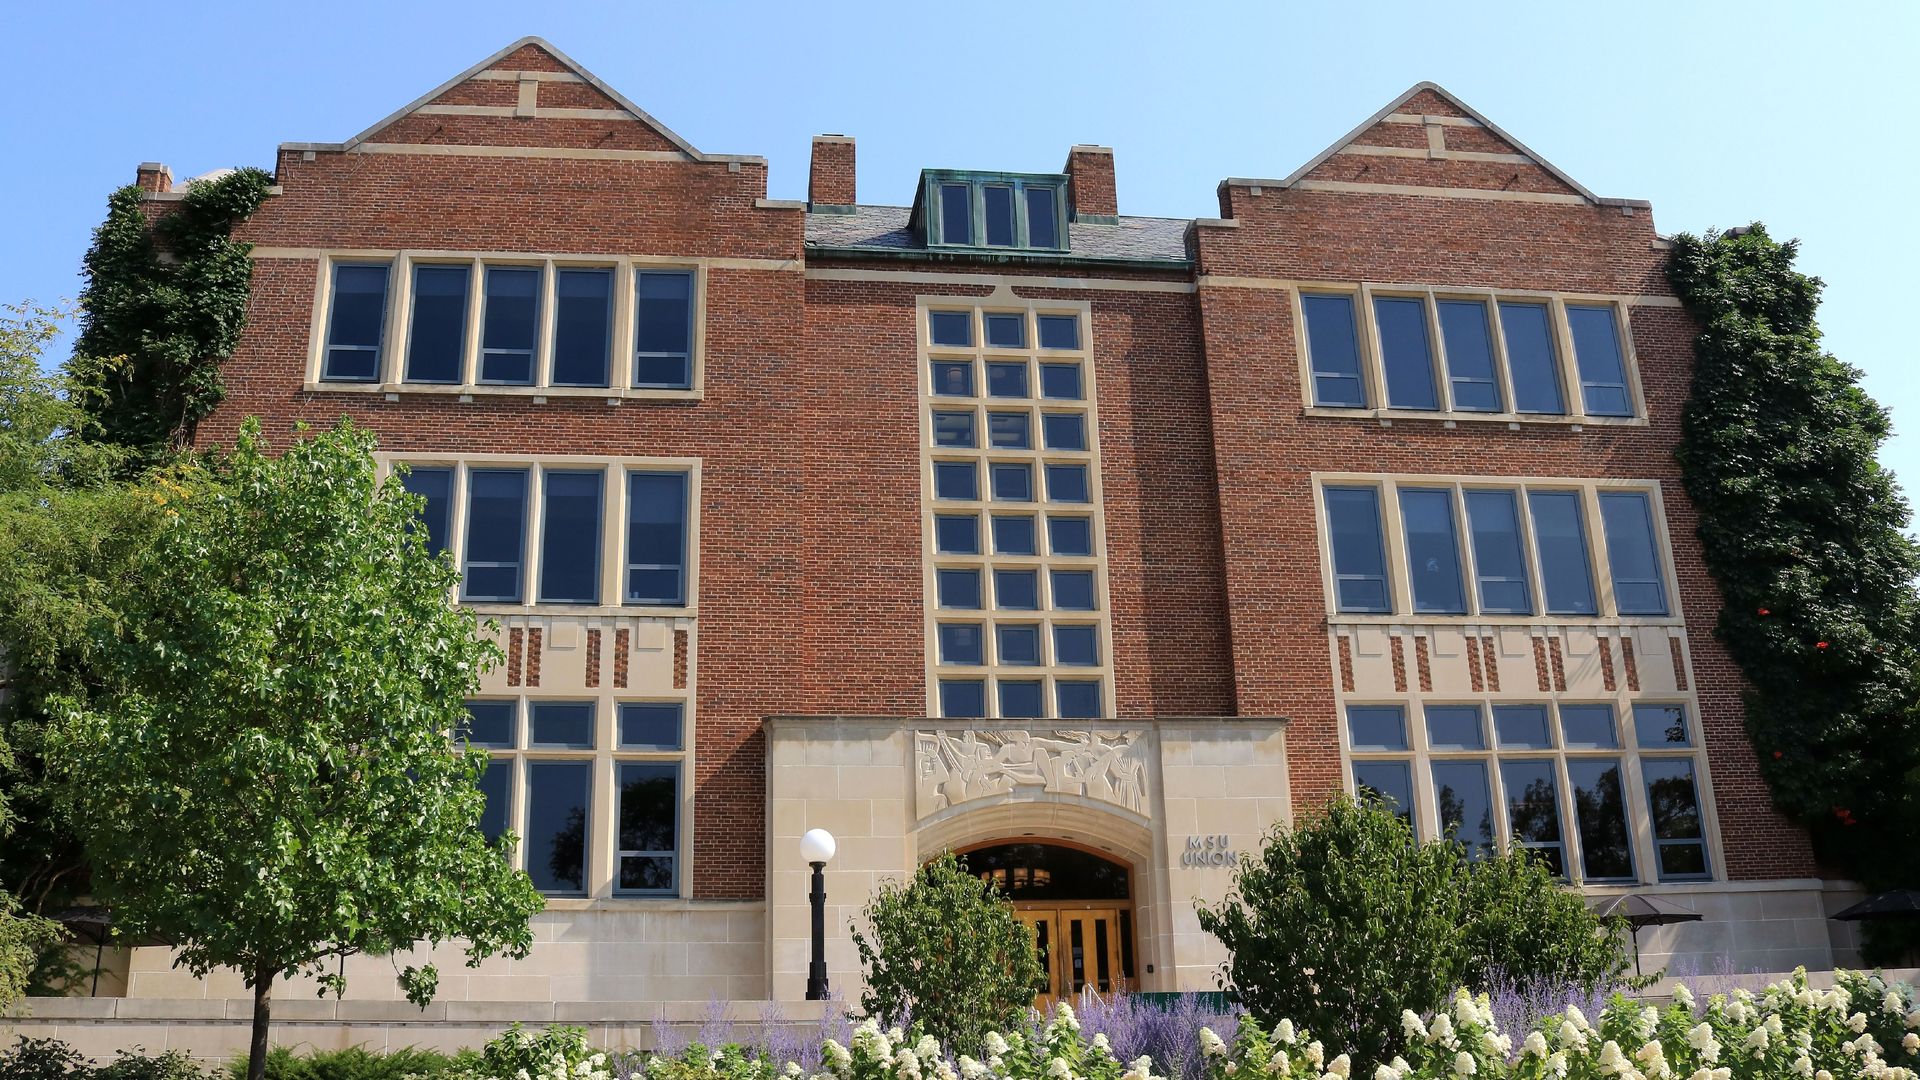 Michigan State University student union building in 2018.